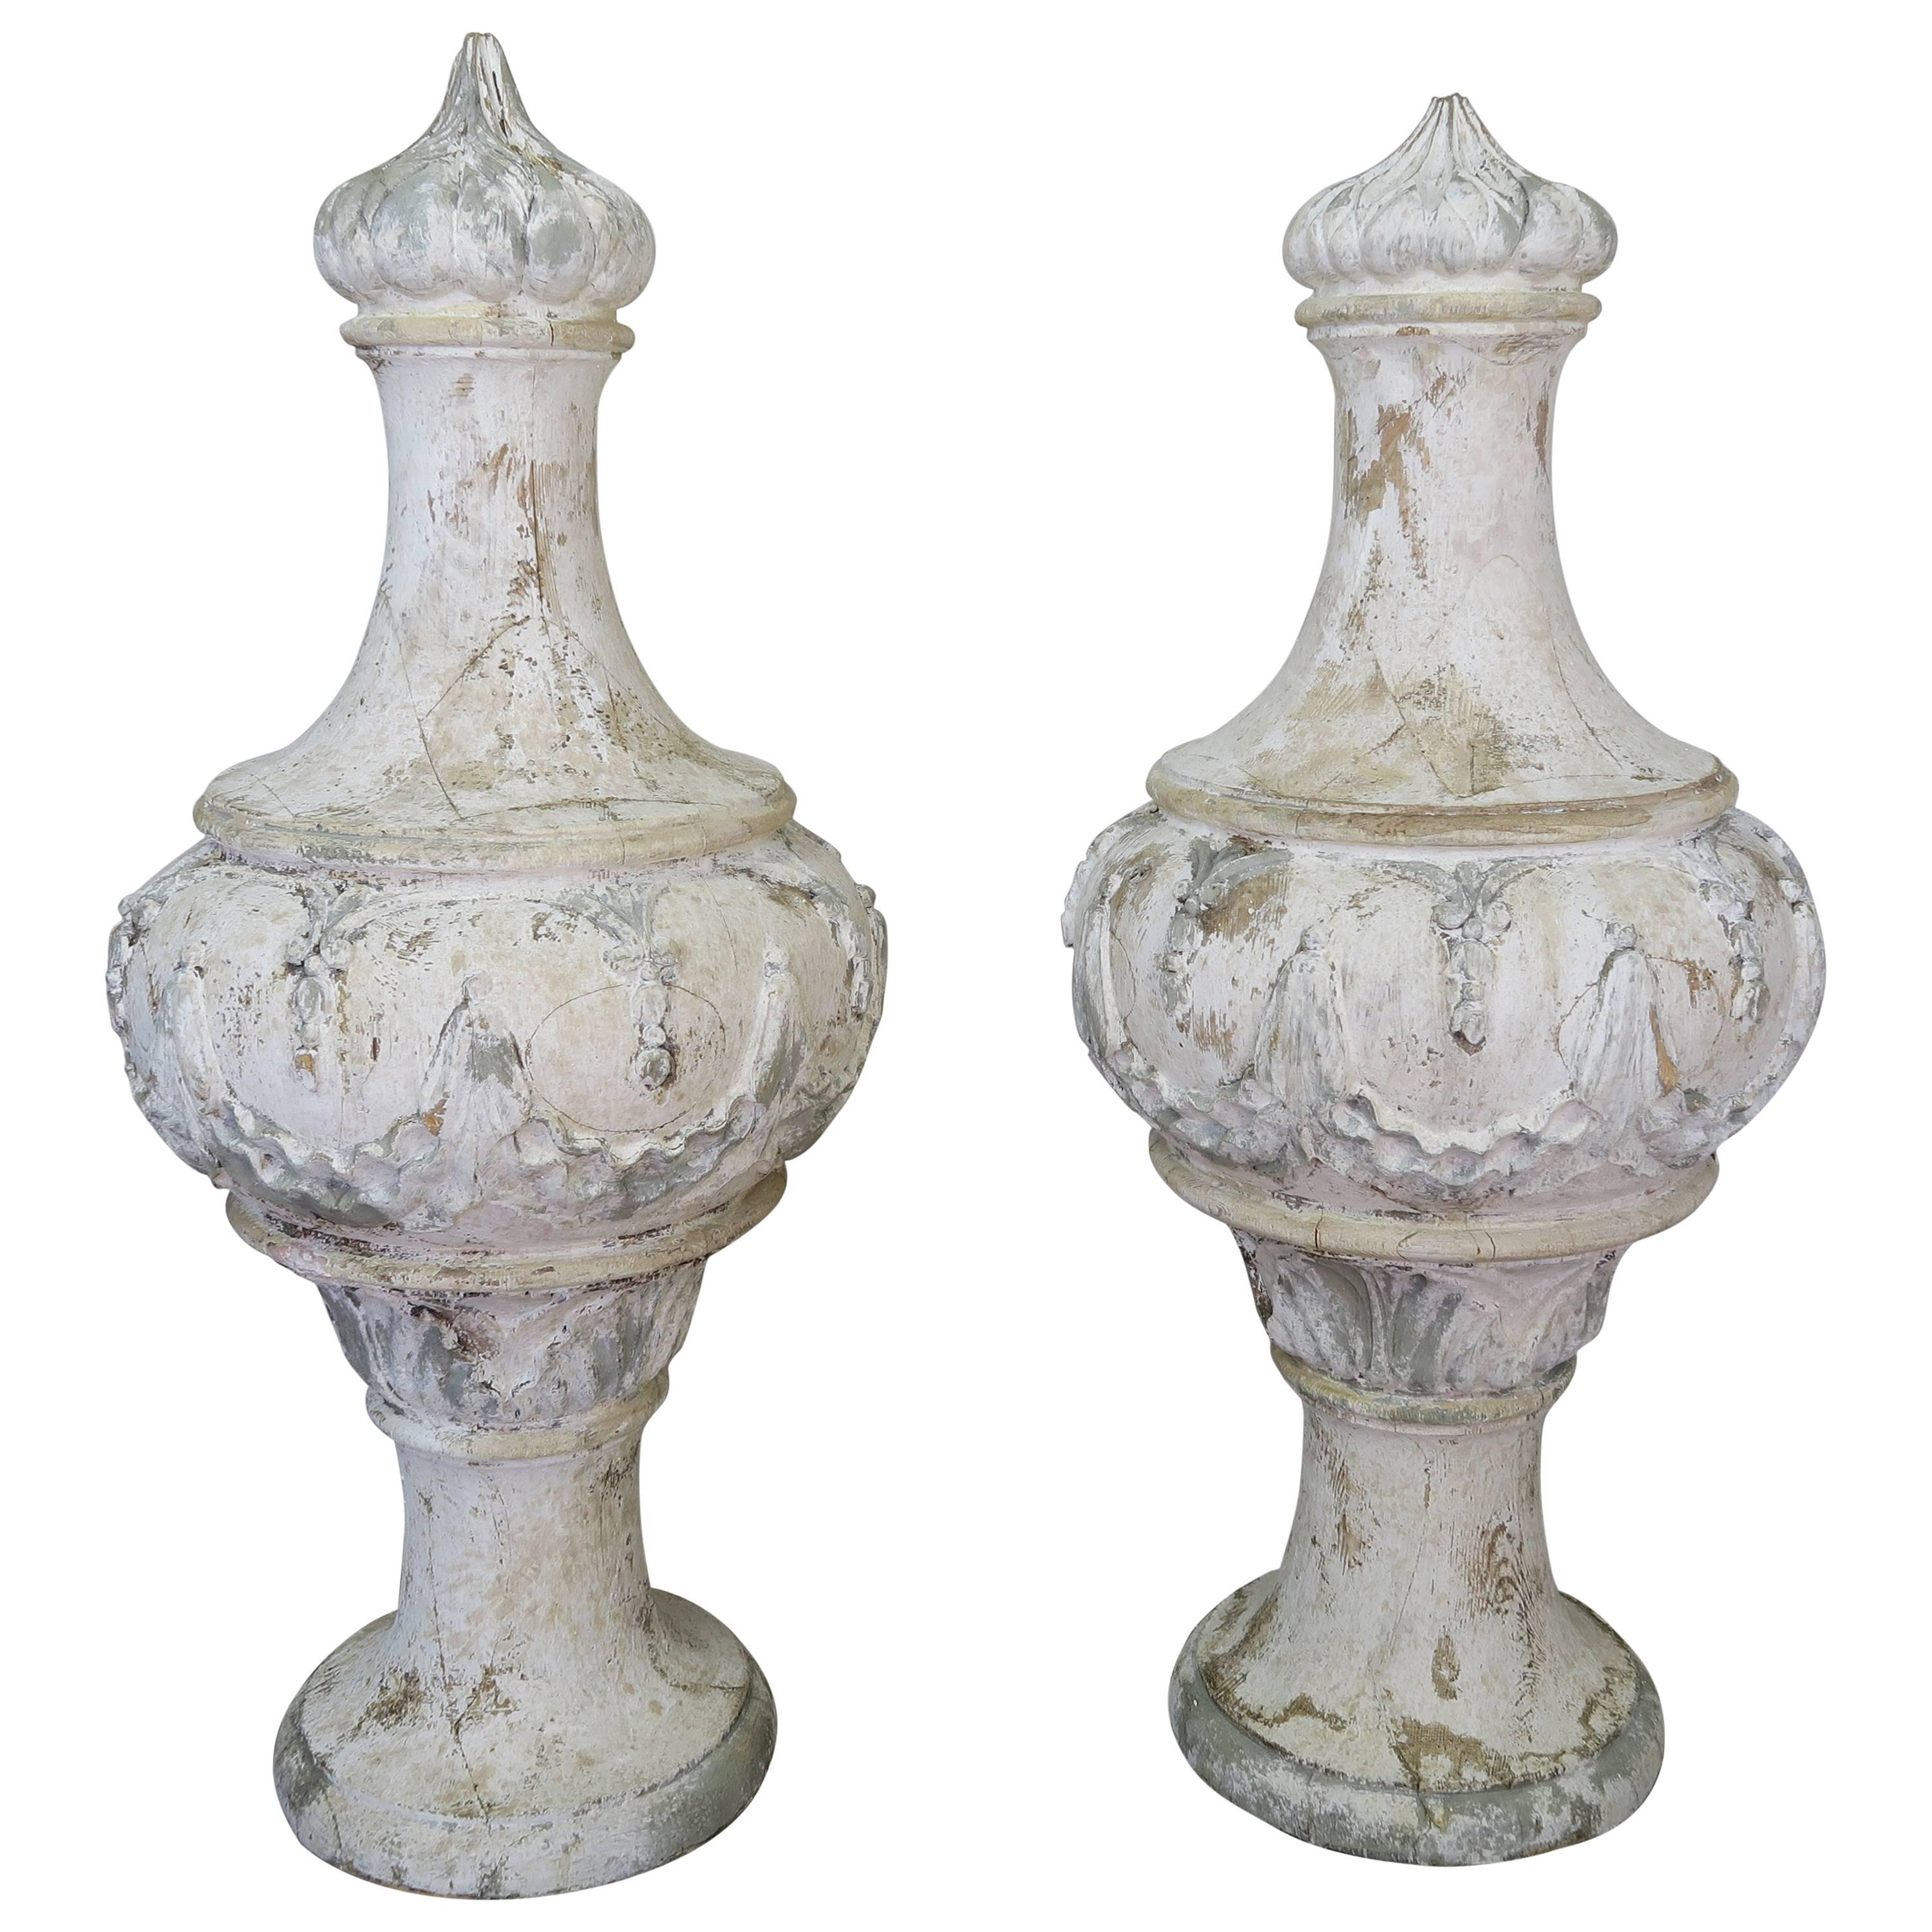 Pair of Monumental French Wood Finials